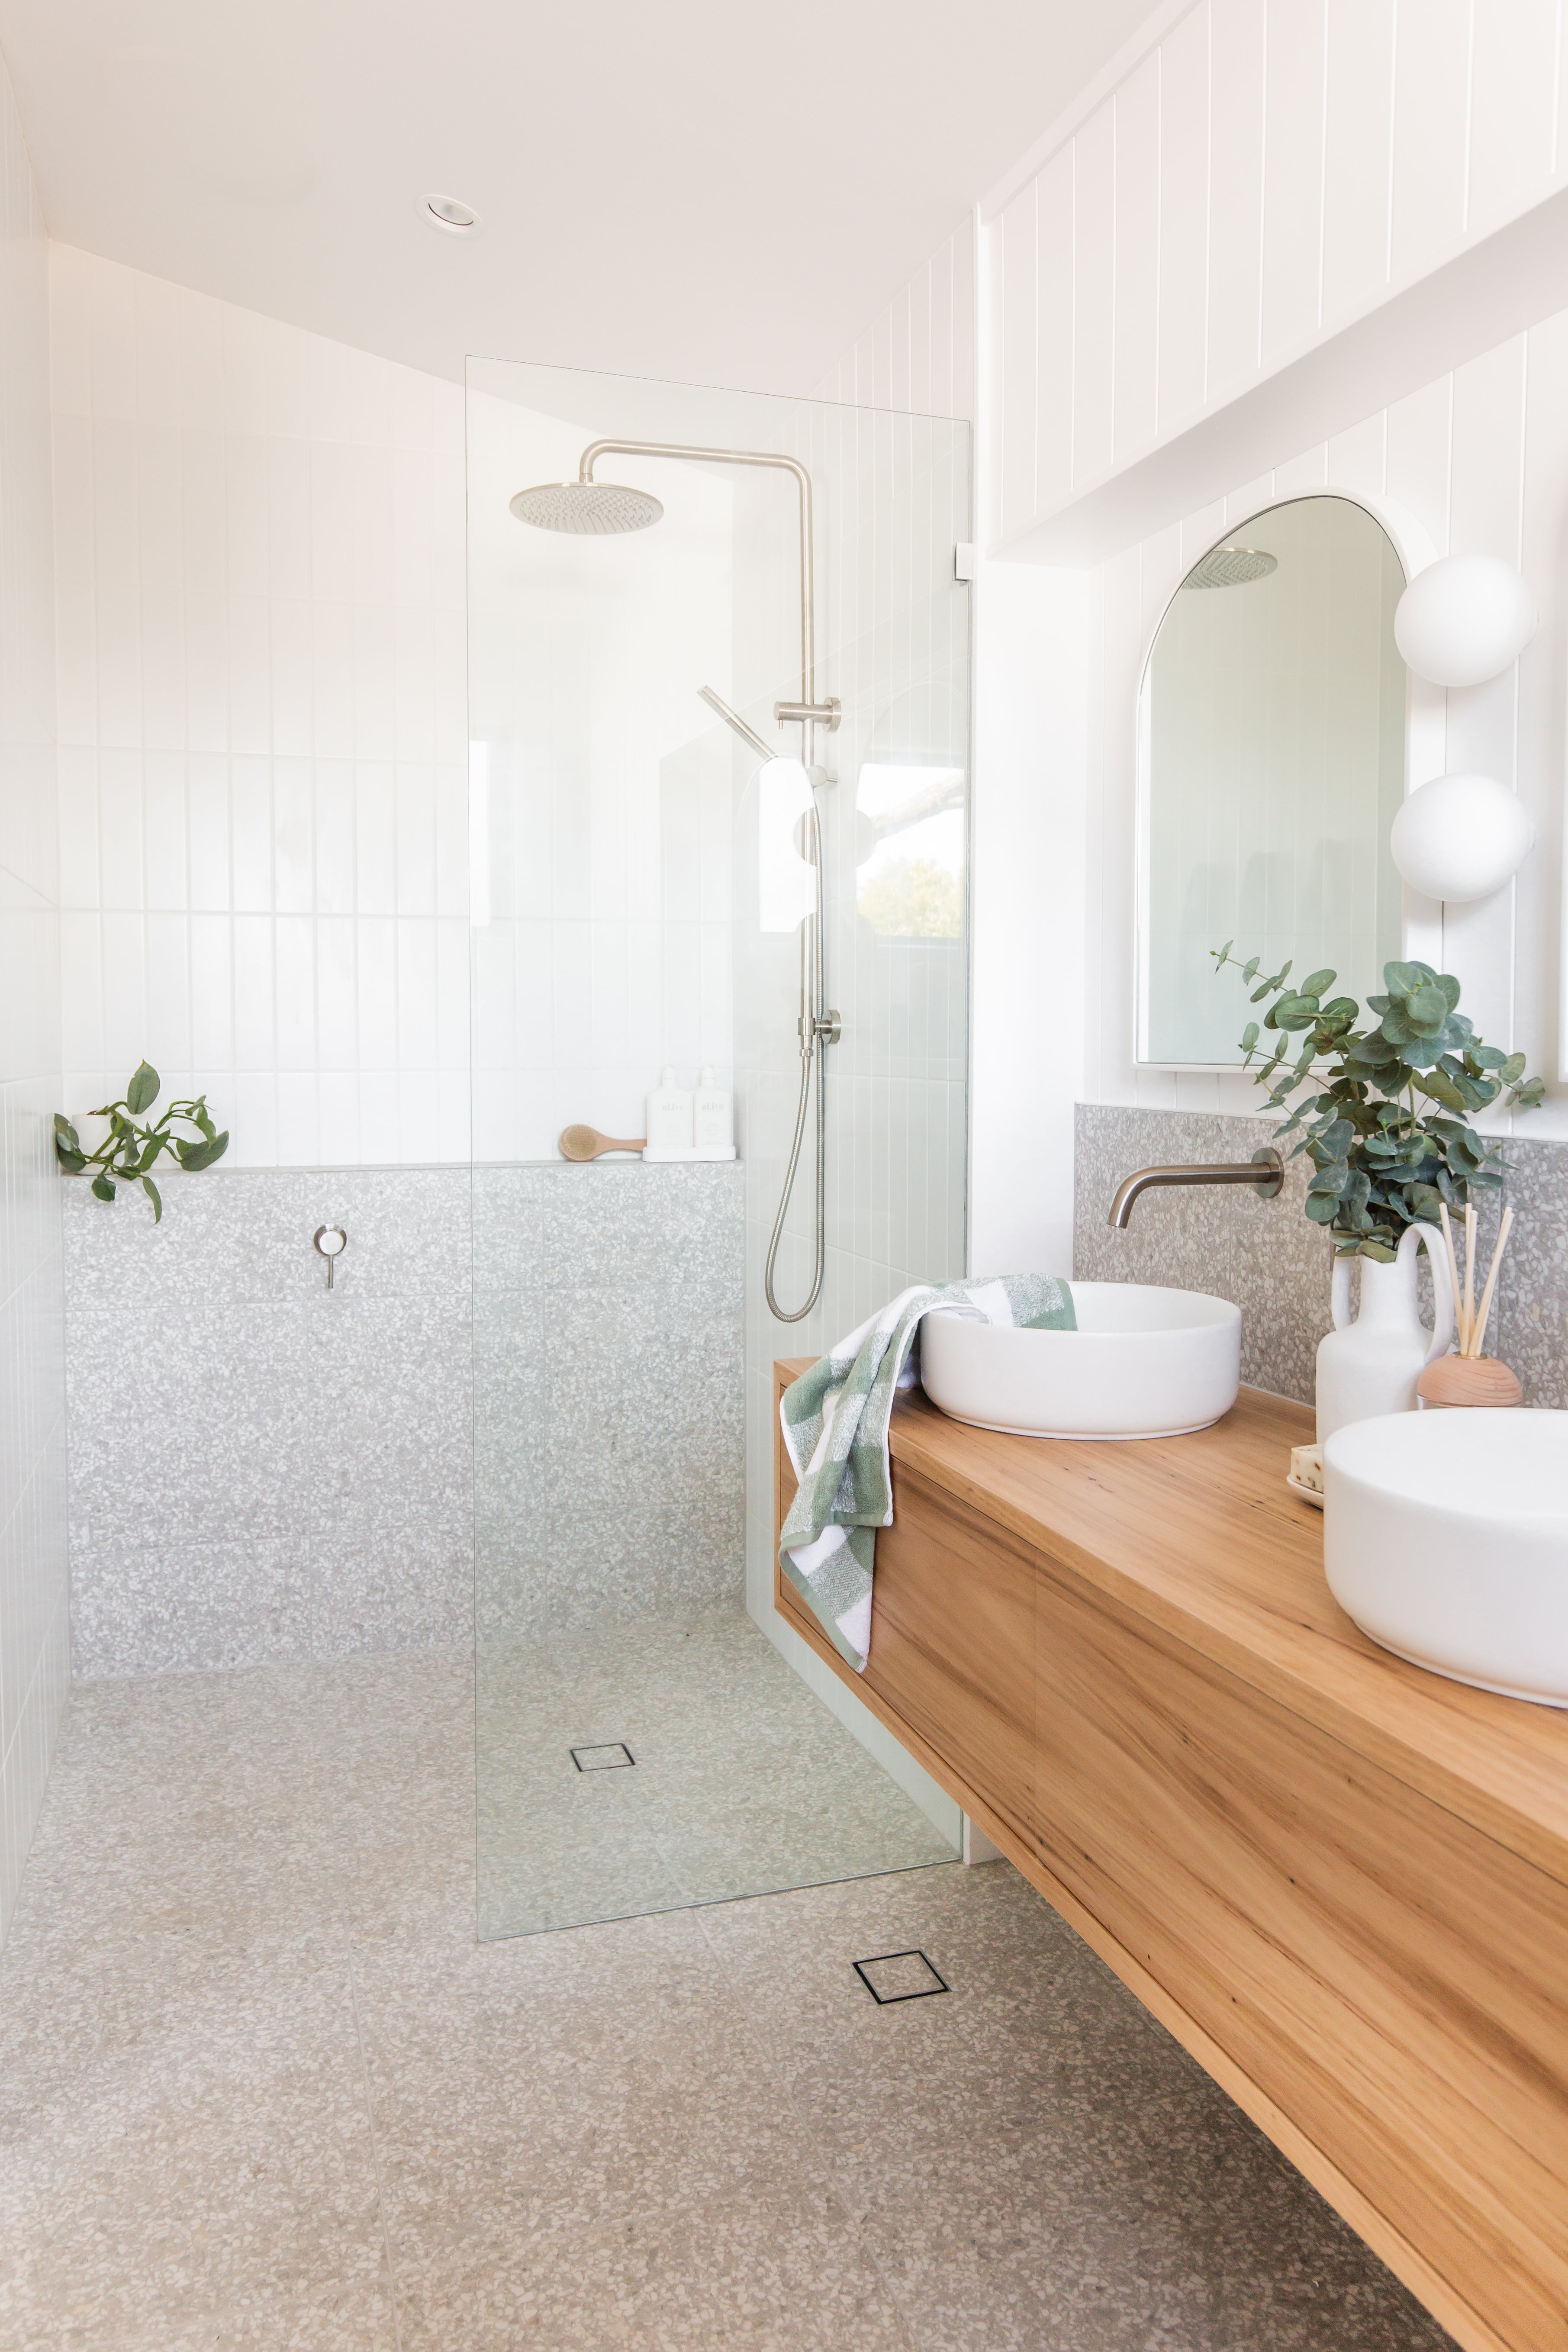 6 Bathroom Trends to Steal in 2022